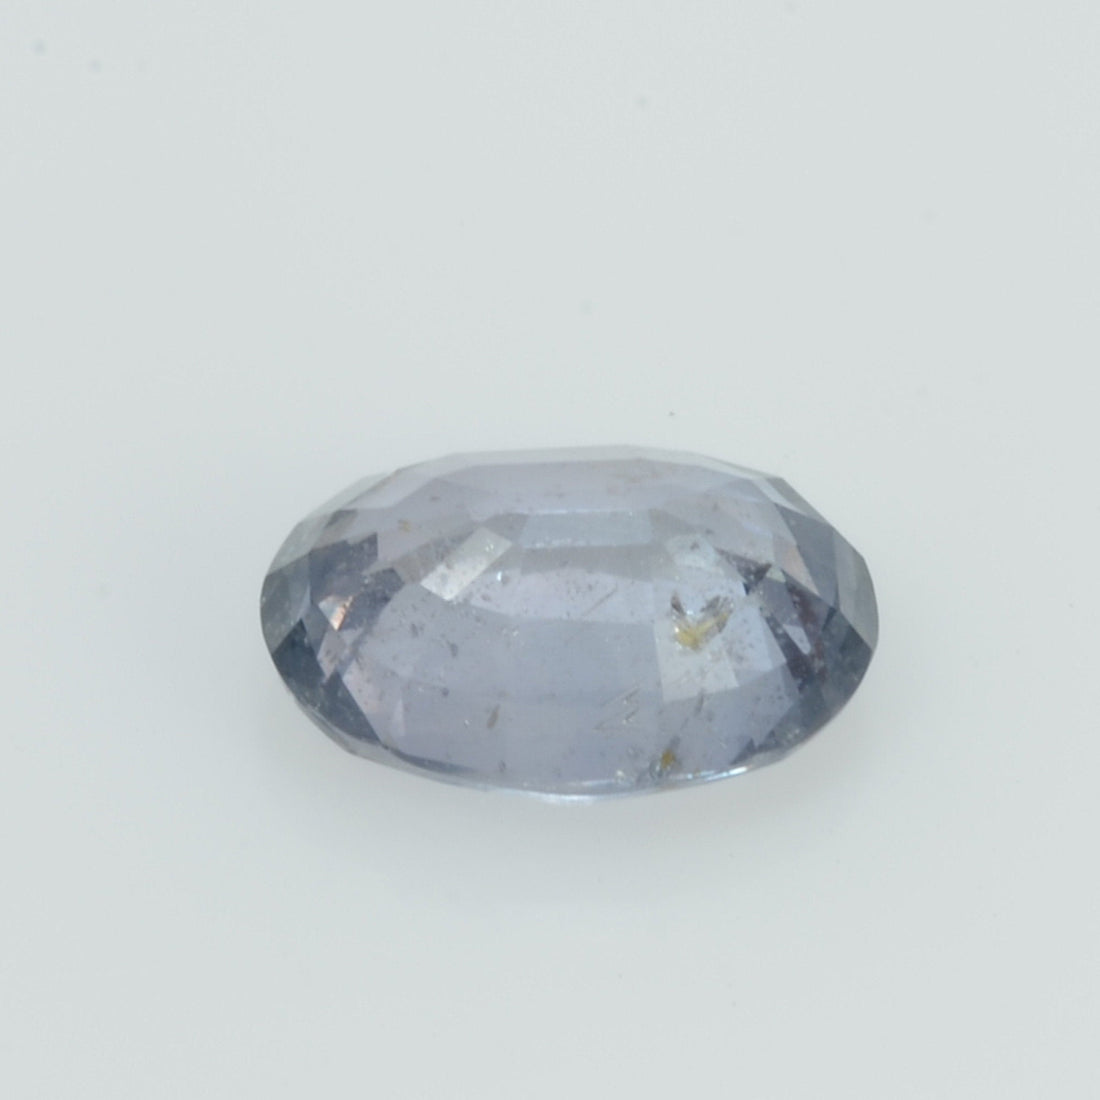 1.53 cts Natural Blue Sapphire Loose Gemstone Oval Cut Certified - Thai Gems Export Ltd.